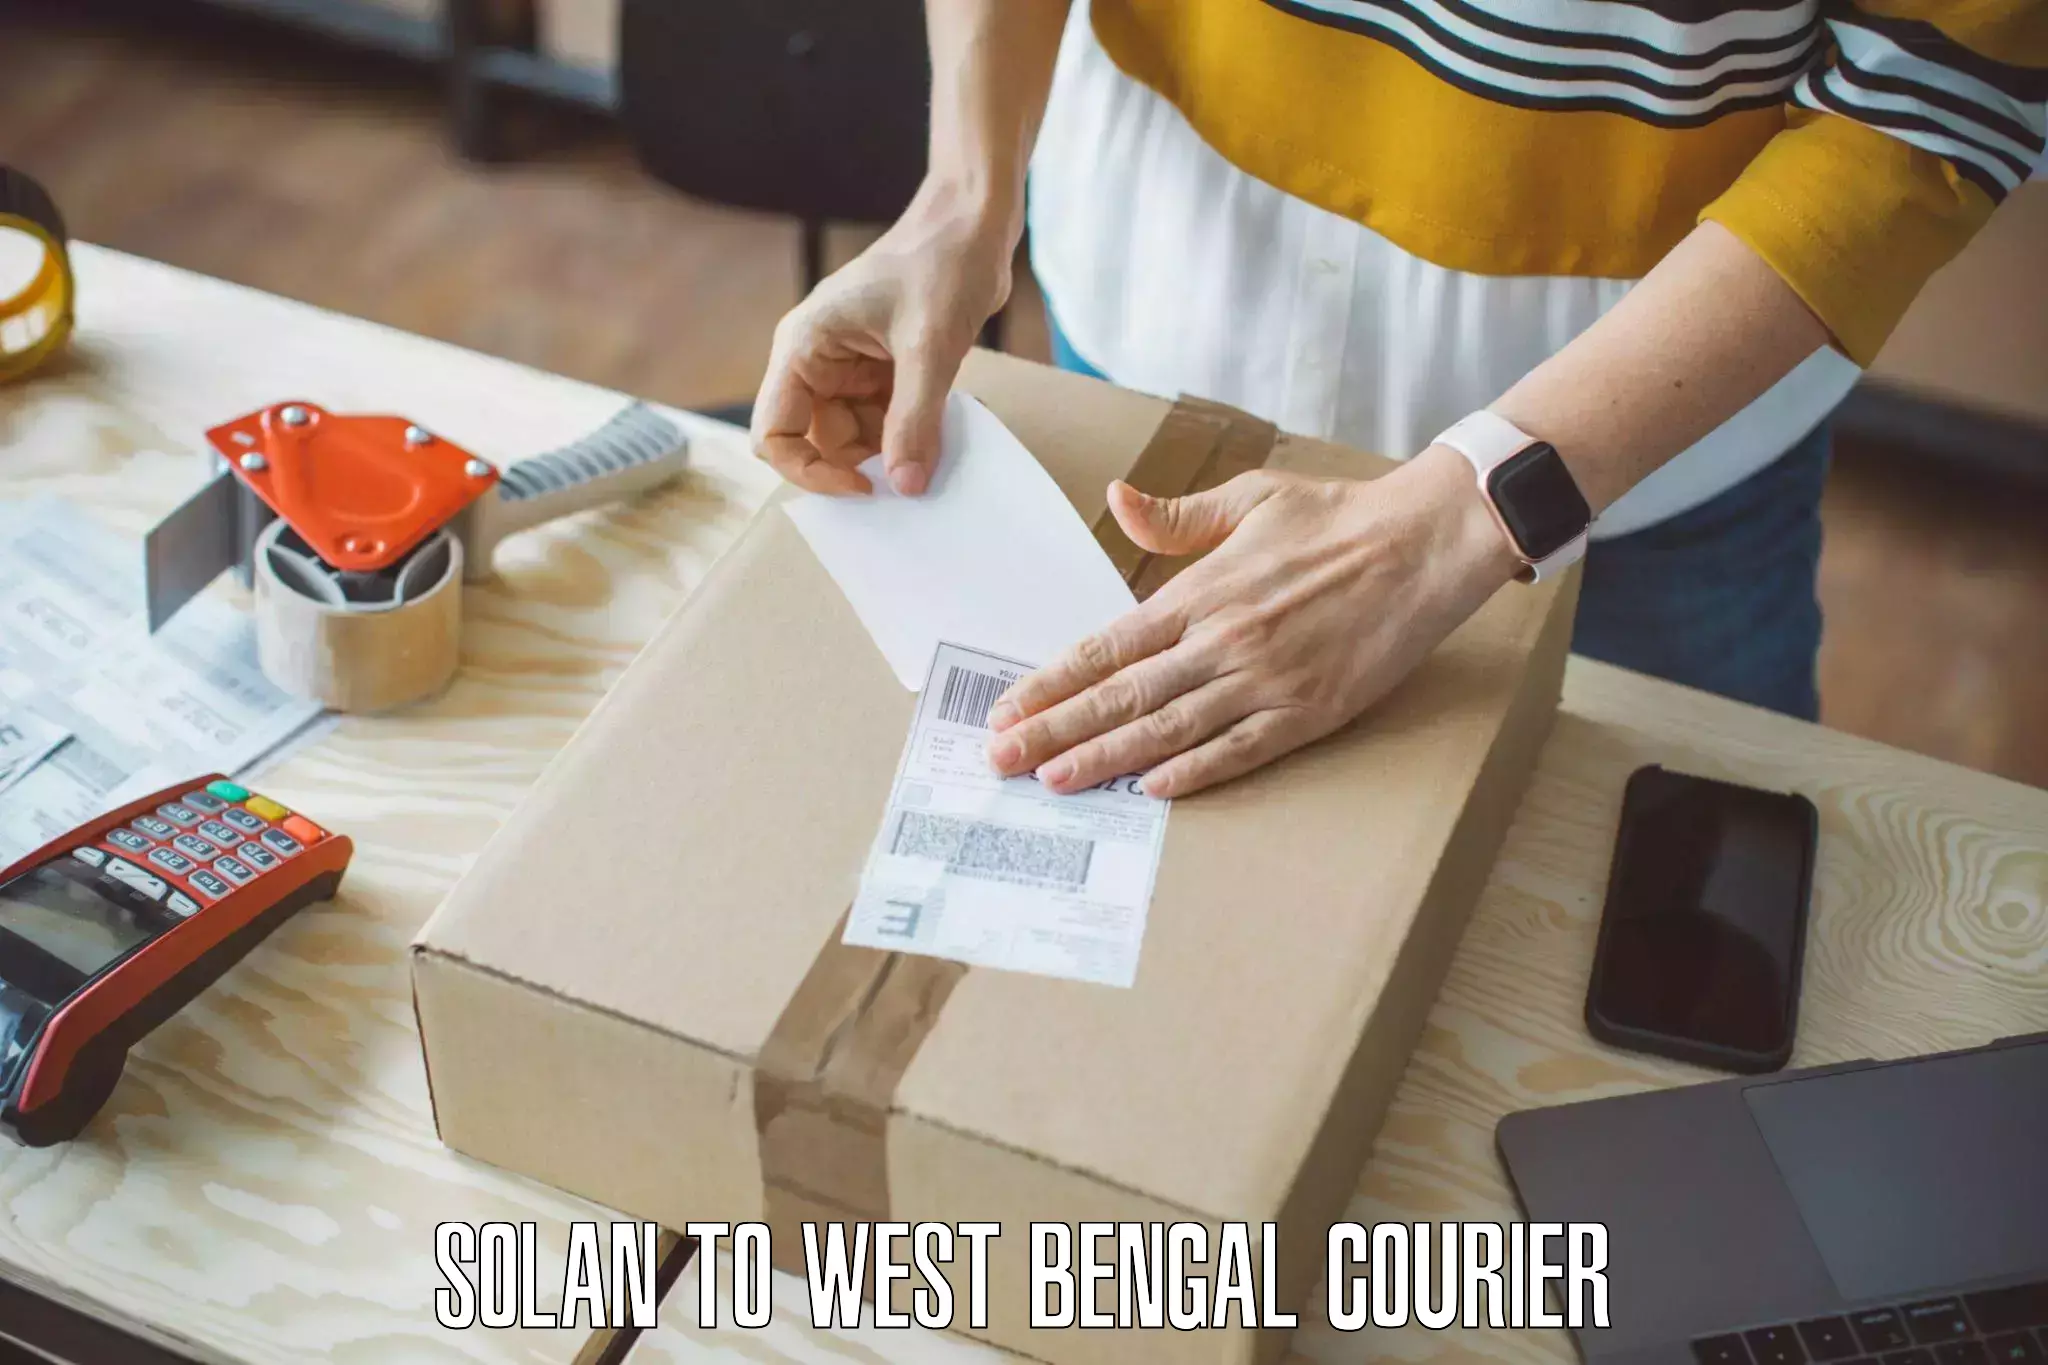 Furniture transport specialists Solan to West Bengal